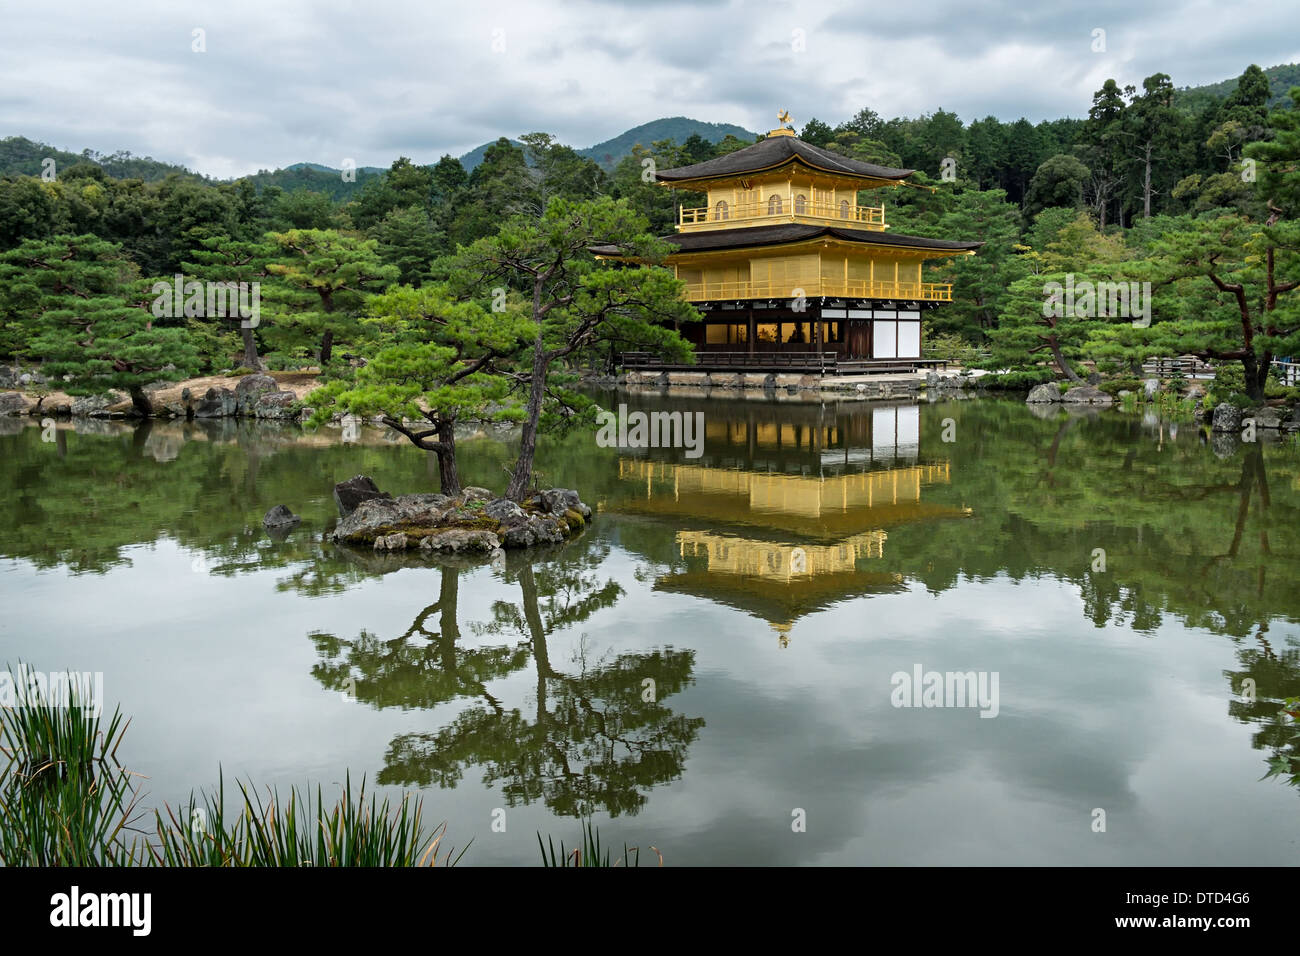 Kinkakuji Temple (Golden Pavilion Temple) and landscaped trees reflecting in Kyōko-chi (Mirror Pond) Stock Photo